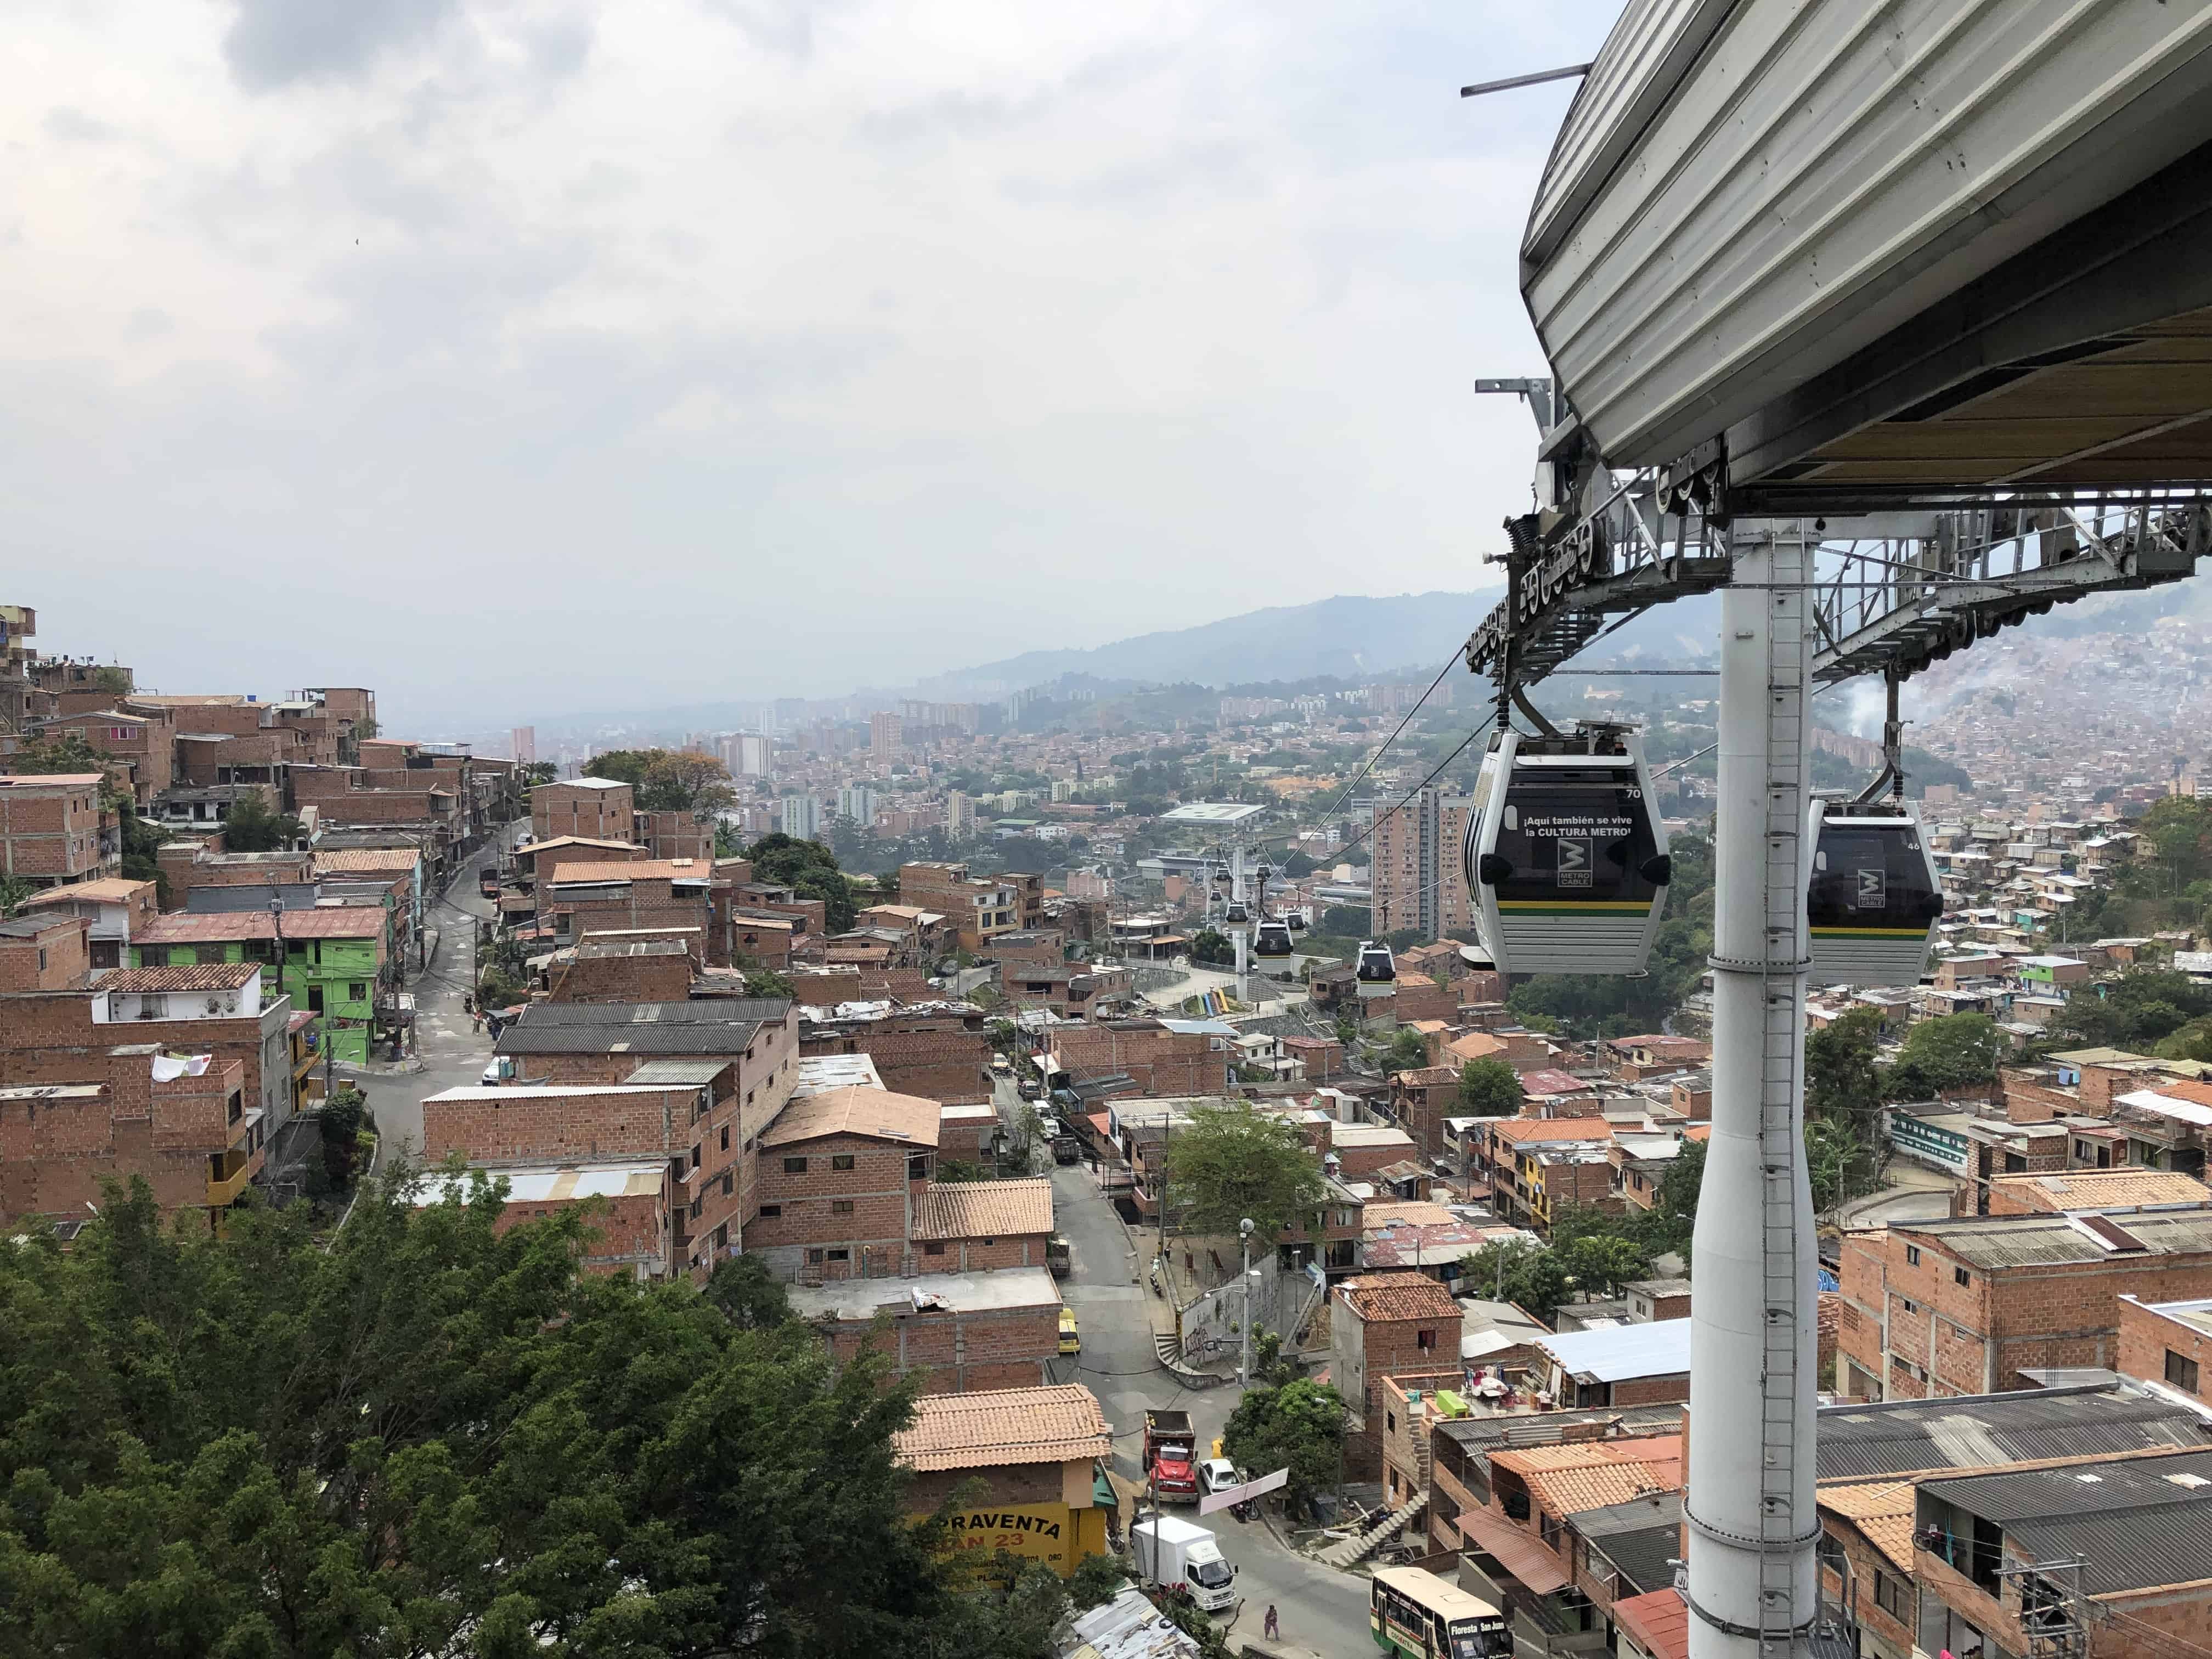 View from the Metrocable in Medellín, Antioquia, Colombia